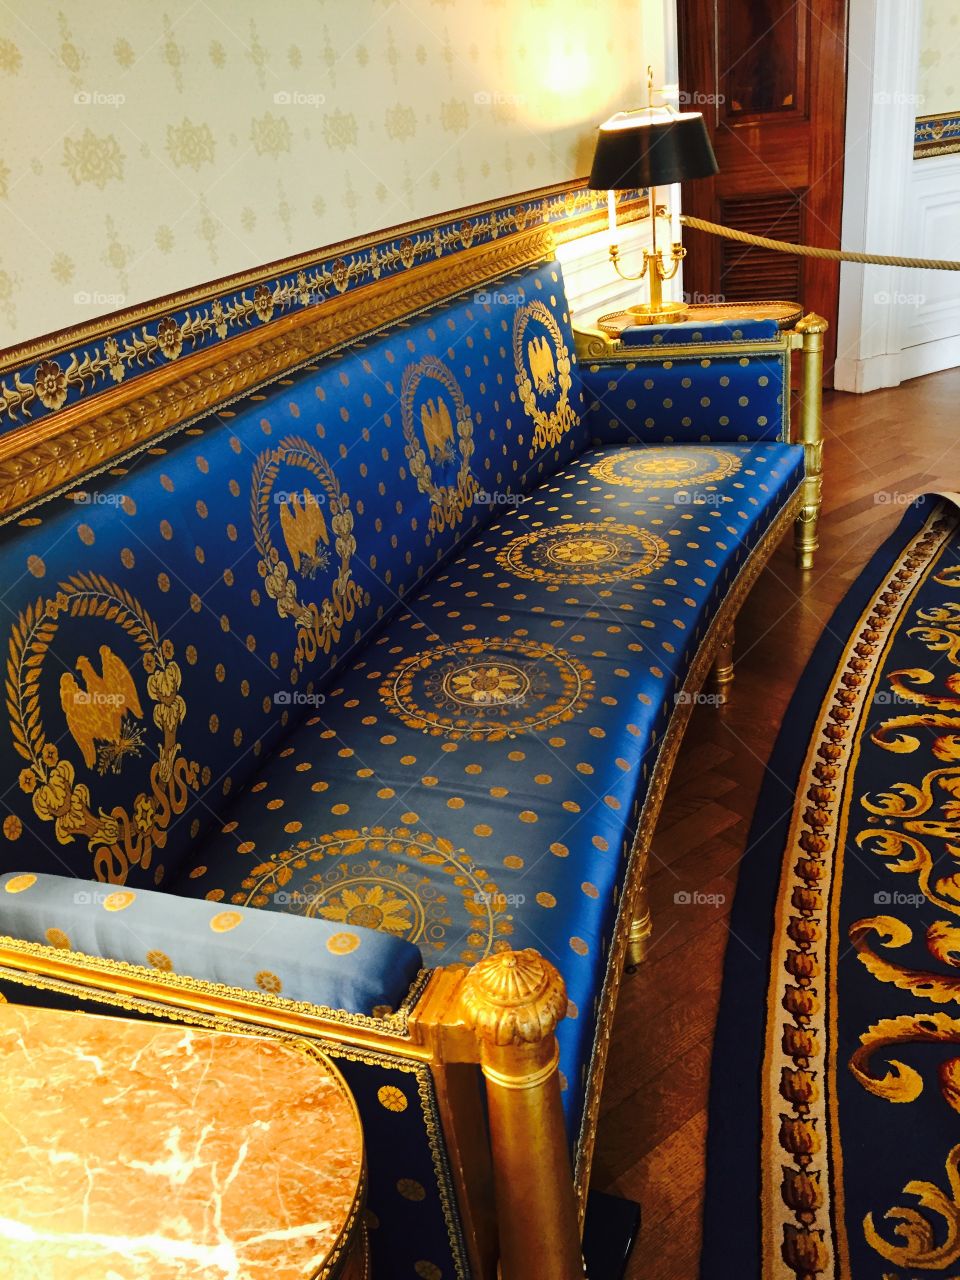 The White House Blue Room Couch
